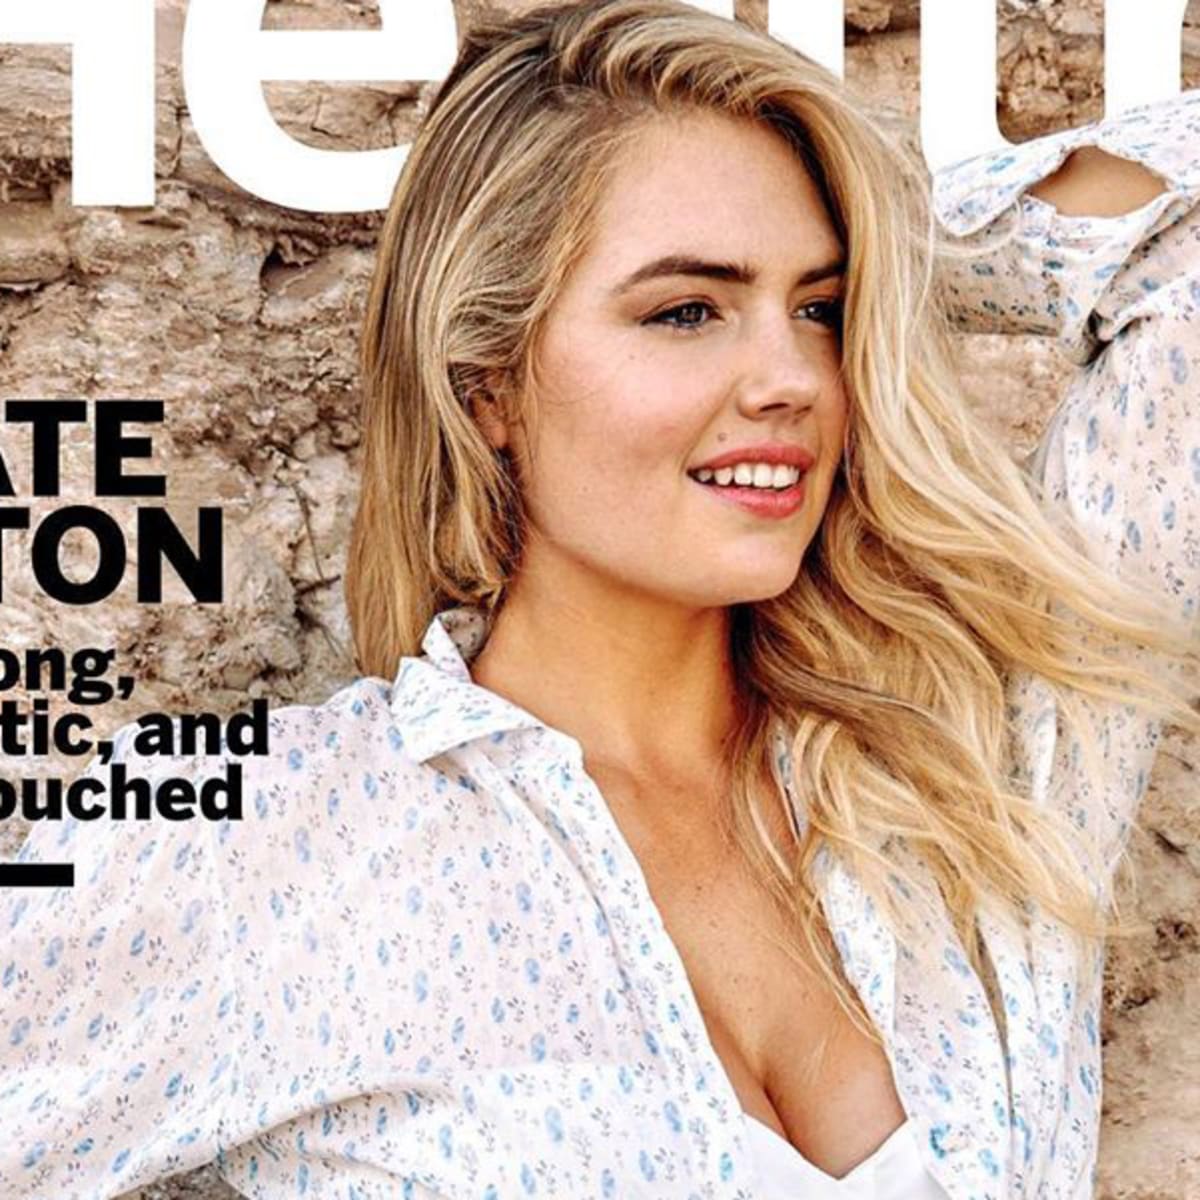 Kate Upton poses unretouched for Health Magazine - Swimsuit | SI.com